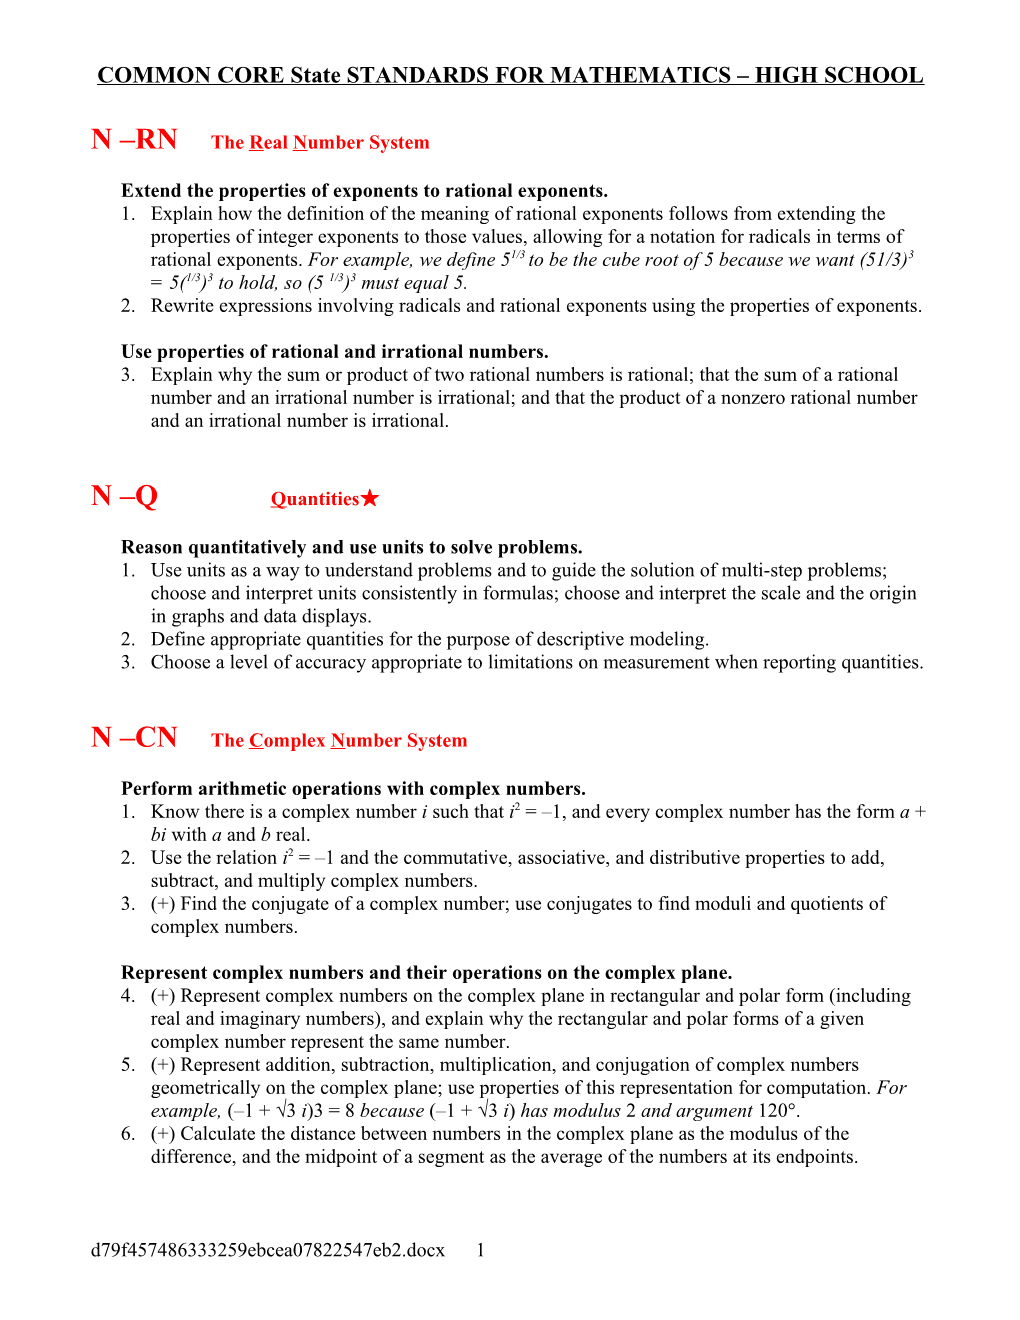 COMMON CORE State STANDARDS for MATHEMATICS HIGH SCHOOL